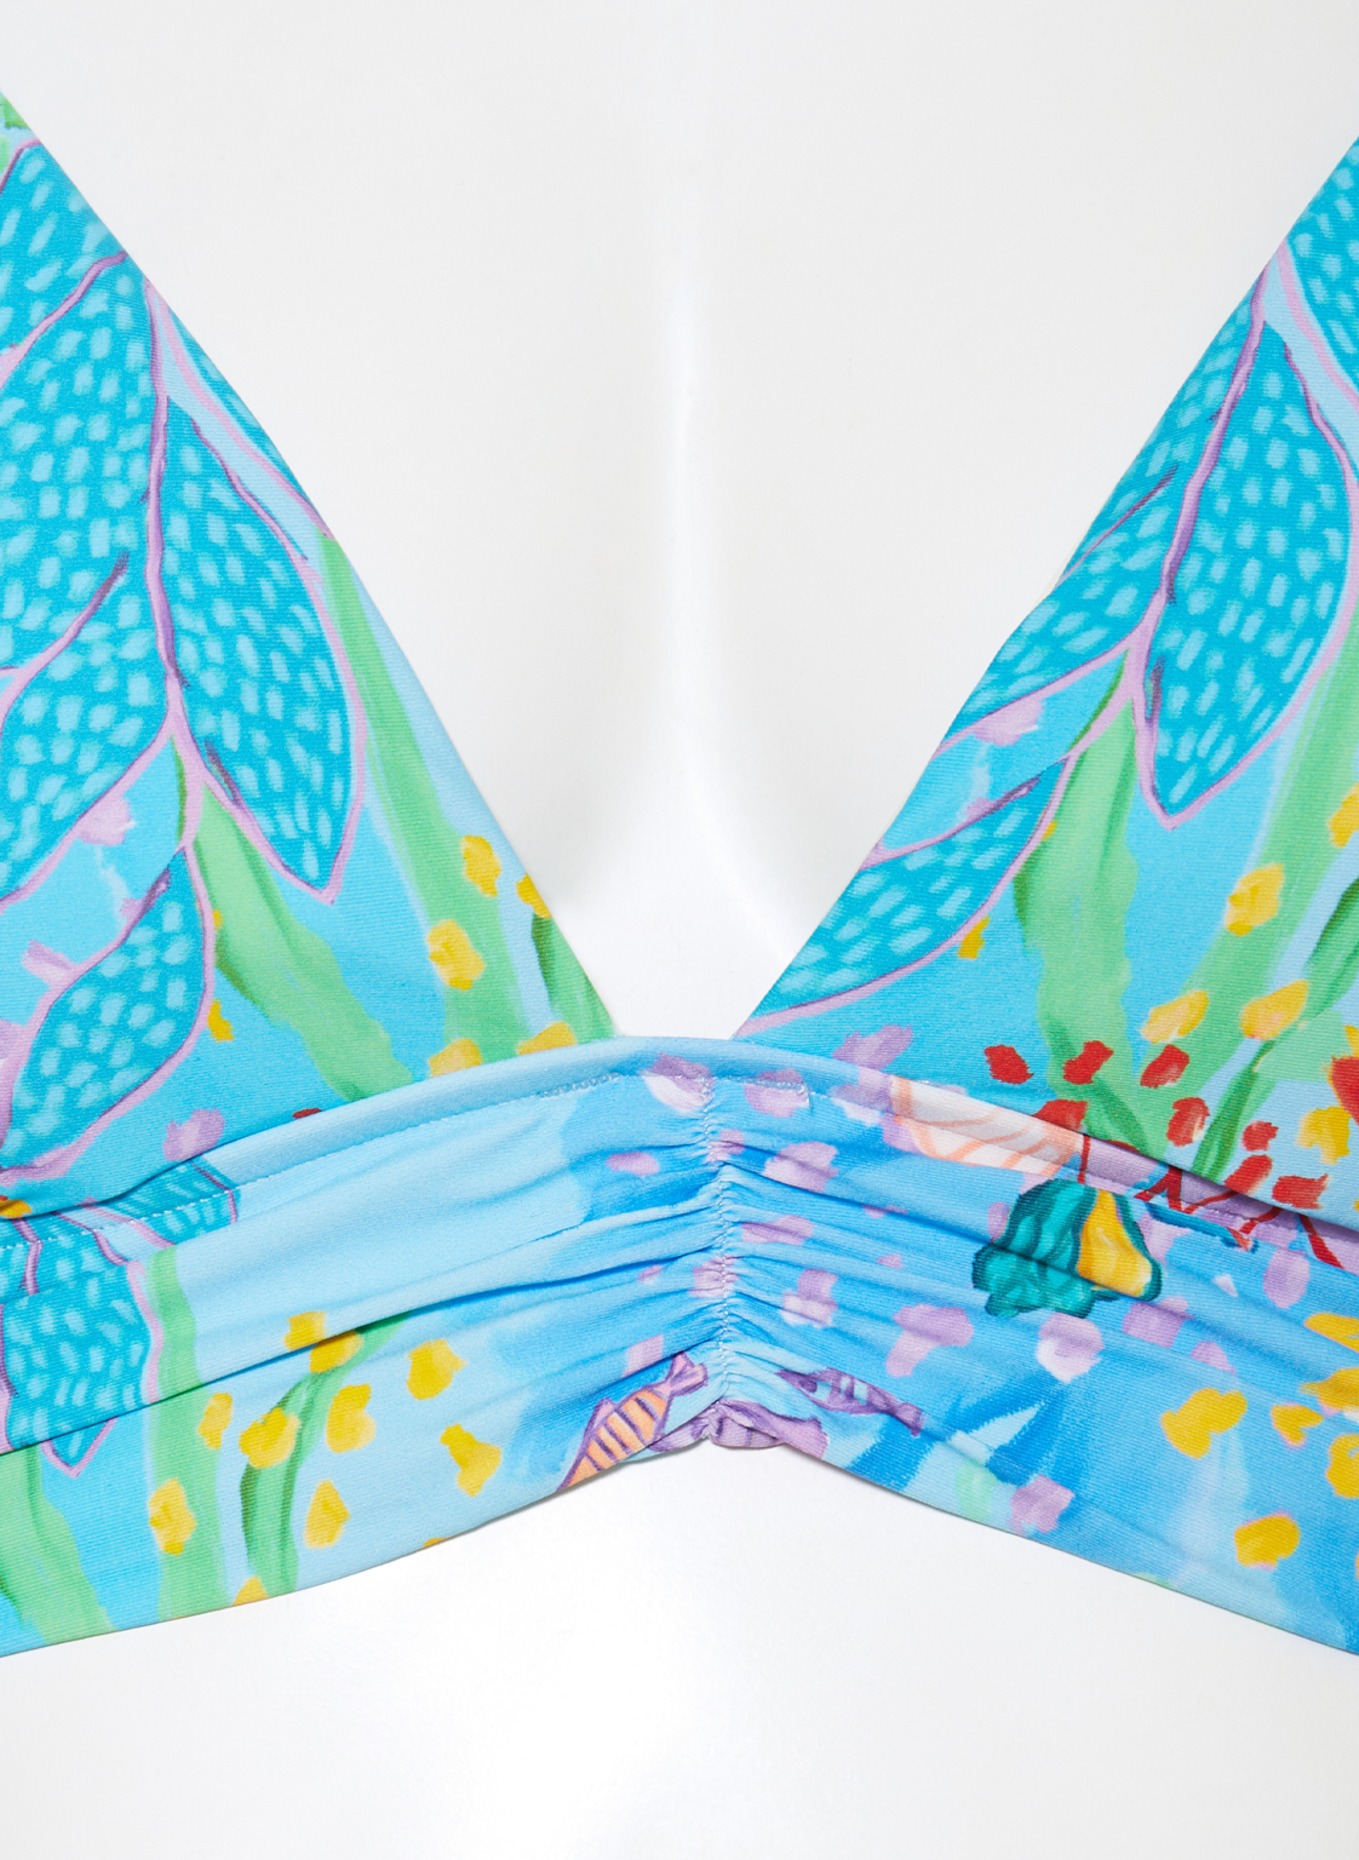 SEAFOLLY Bralette bikini top UNDER THE SEA, Color: LIGHT BLUE/ TURQUOISE/ YELLOW (Image 4)